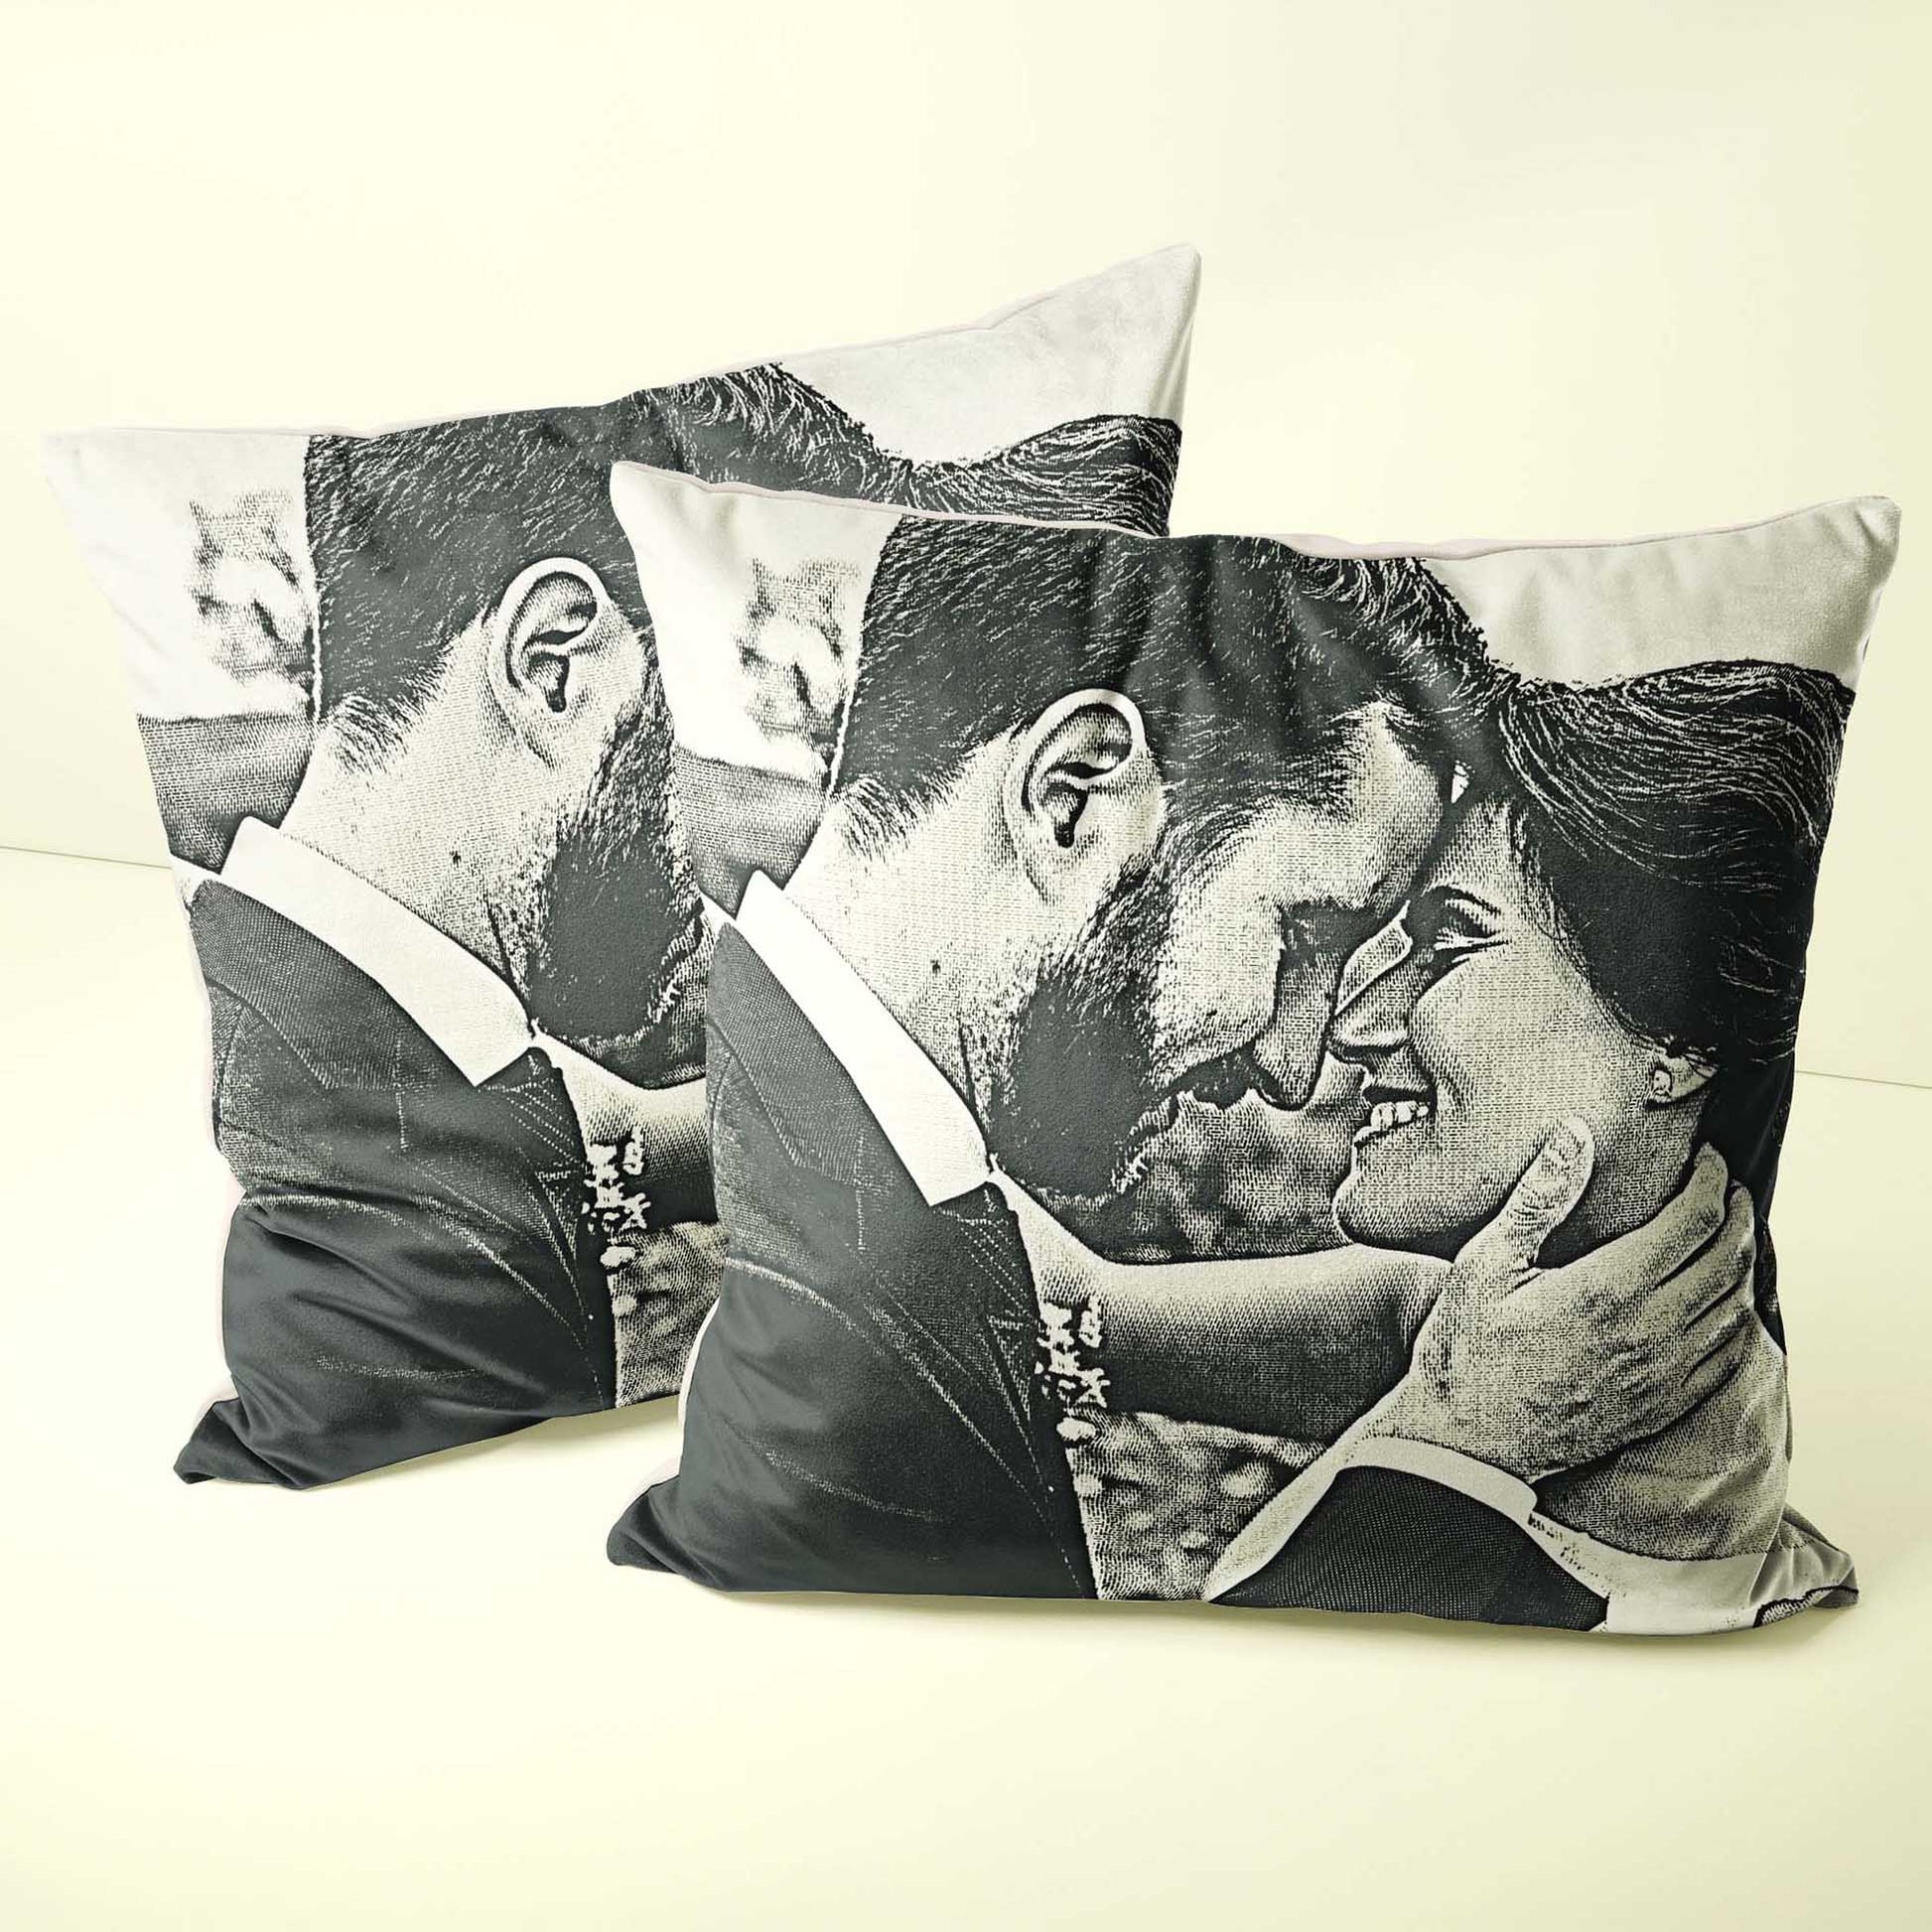 Designed to impress, the Personalised Money Engraved Cushion adds a touch of luxury to your living space. Its soft velvet exterior invites you to snuggle up in comfort, while the sharp engraving and vibrant colors 